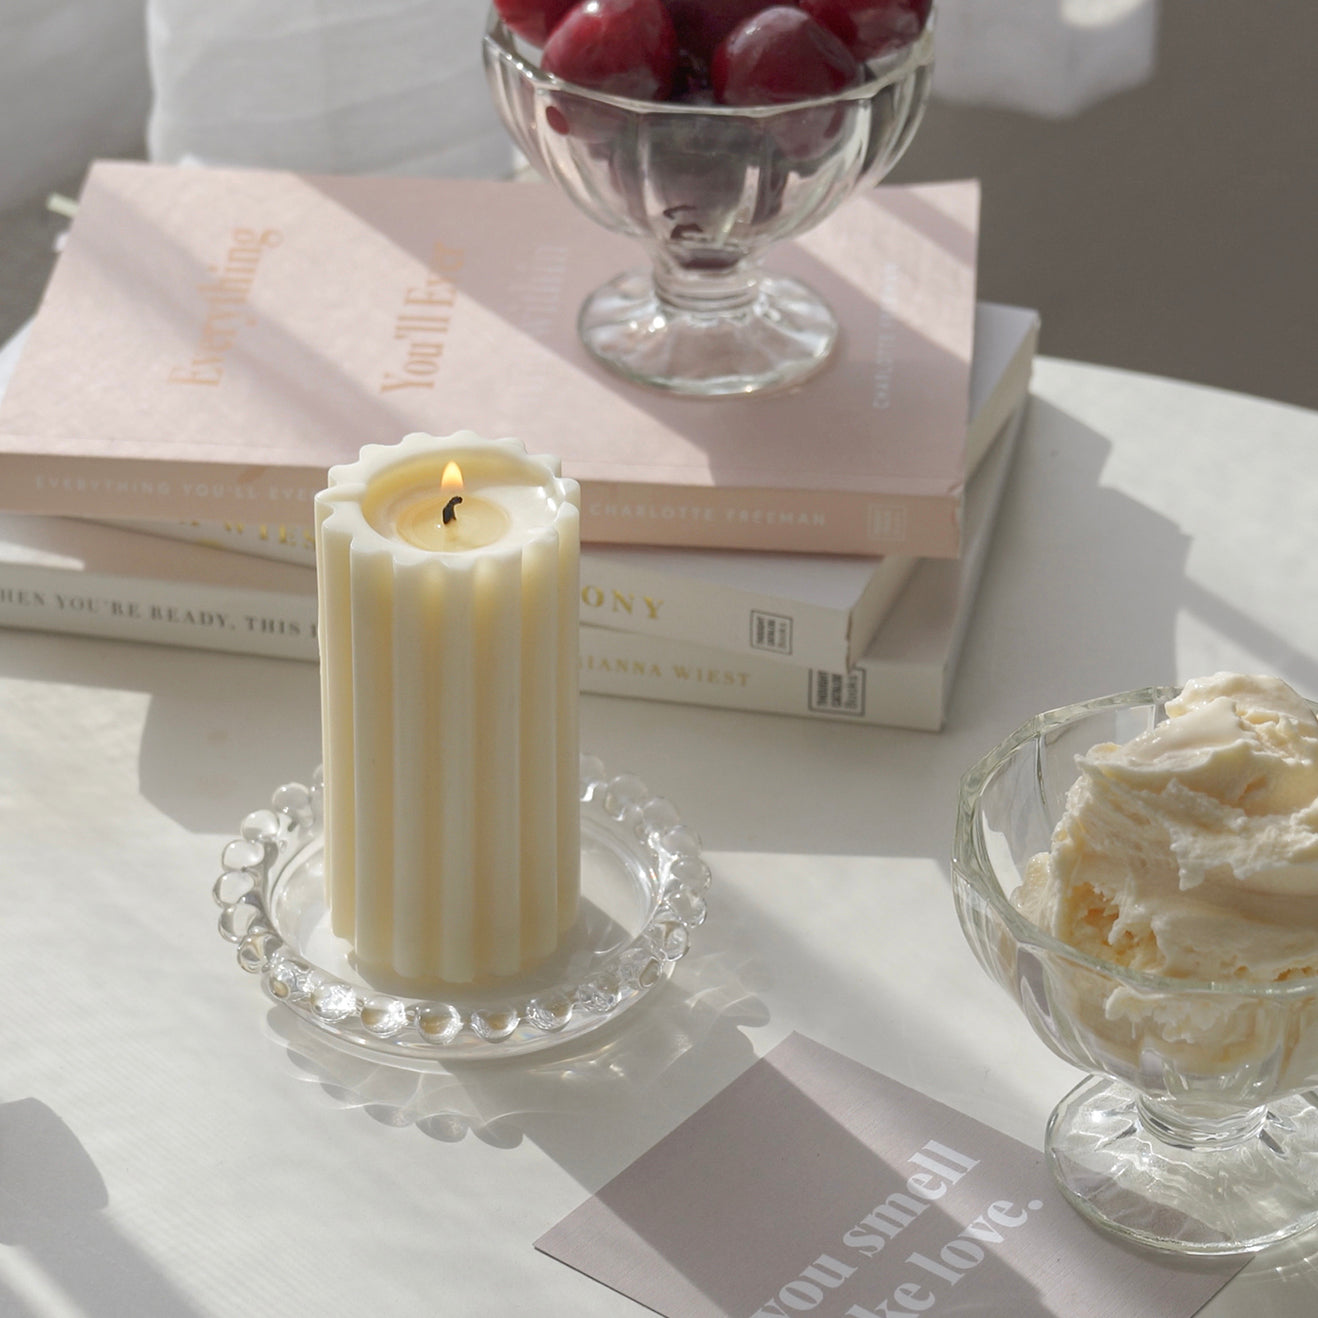 a lit ribbed pillar soy candle on a clear mini beaded tray, ice cream in a bowl, postcard, books, and cherries in an ice cream bowl on white round table